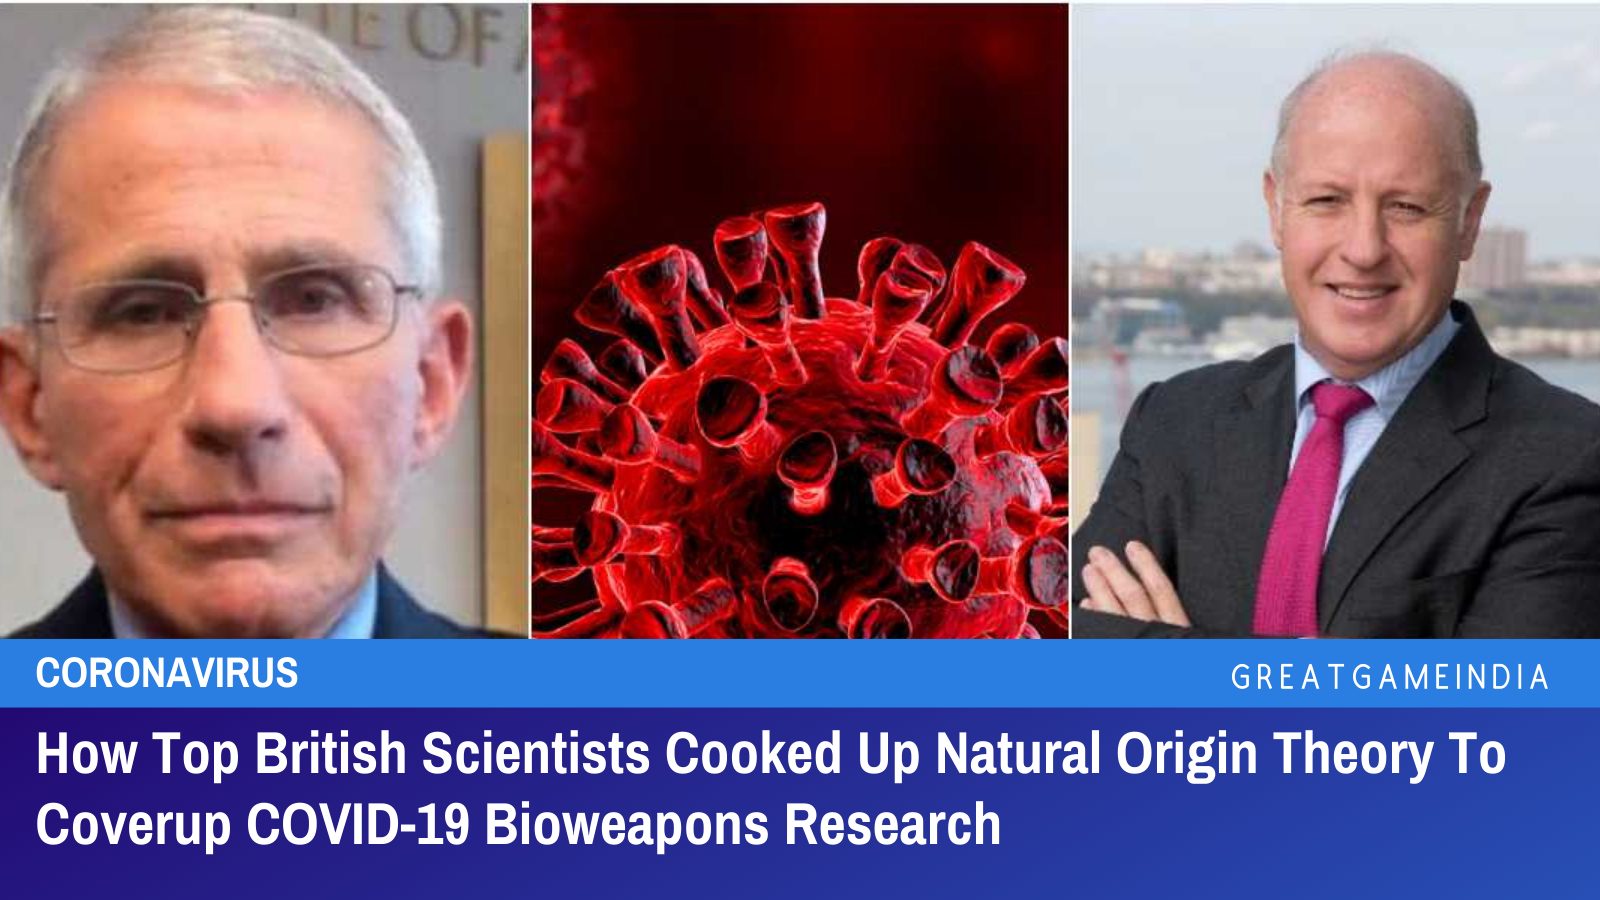 How Top British Scientists Covered Up COVID-19 Bioweapons Research To Peddle Natural Origin Theory